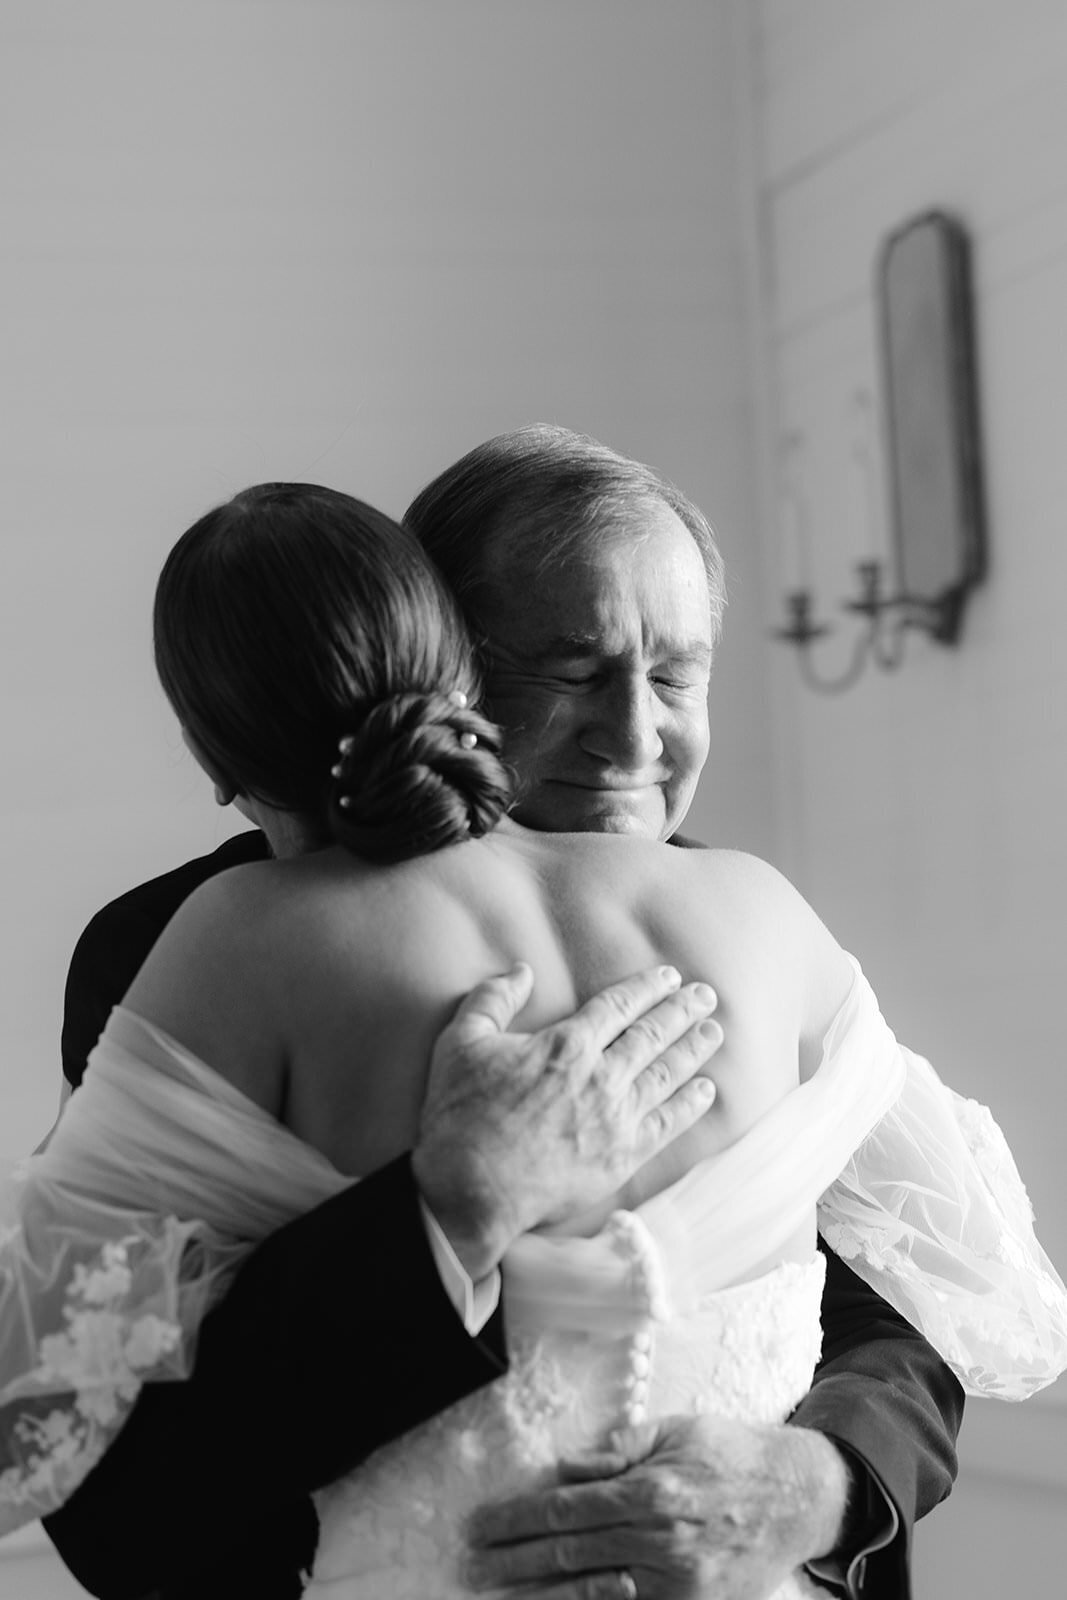 Emotional father-of-the-bride hugs his daughter on her wedding day